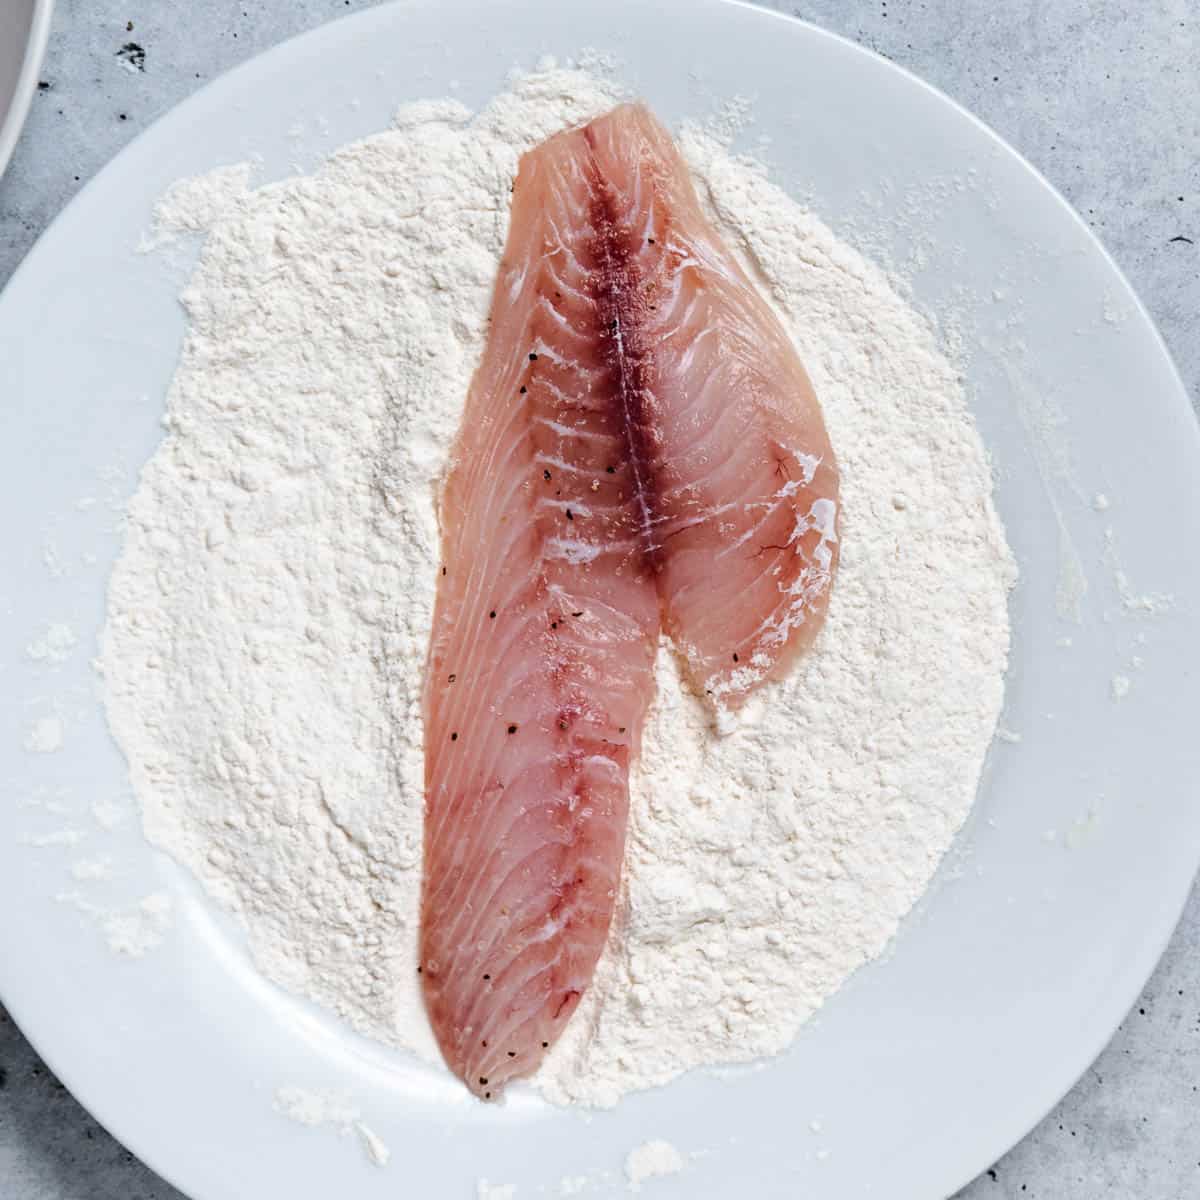 Fish on a plate of flour.